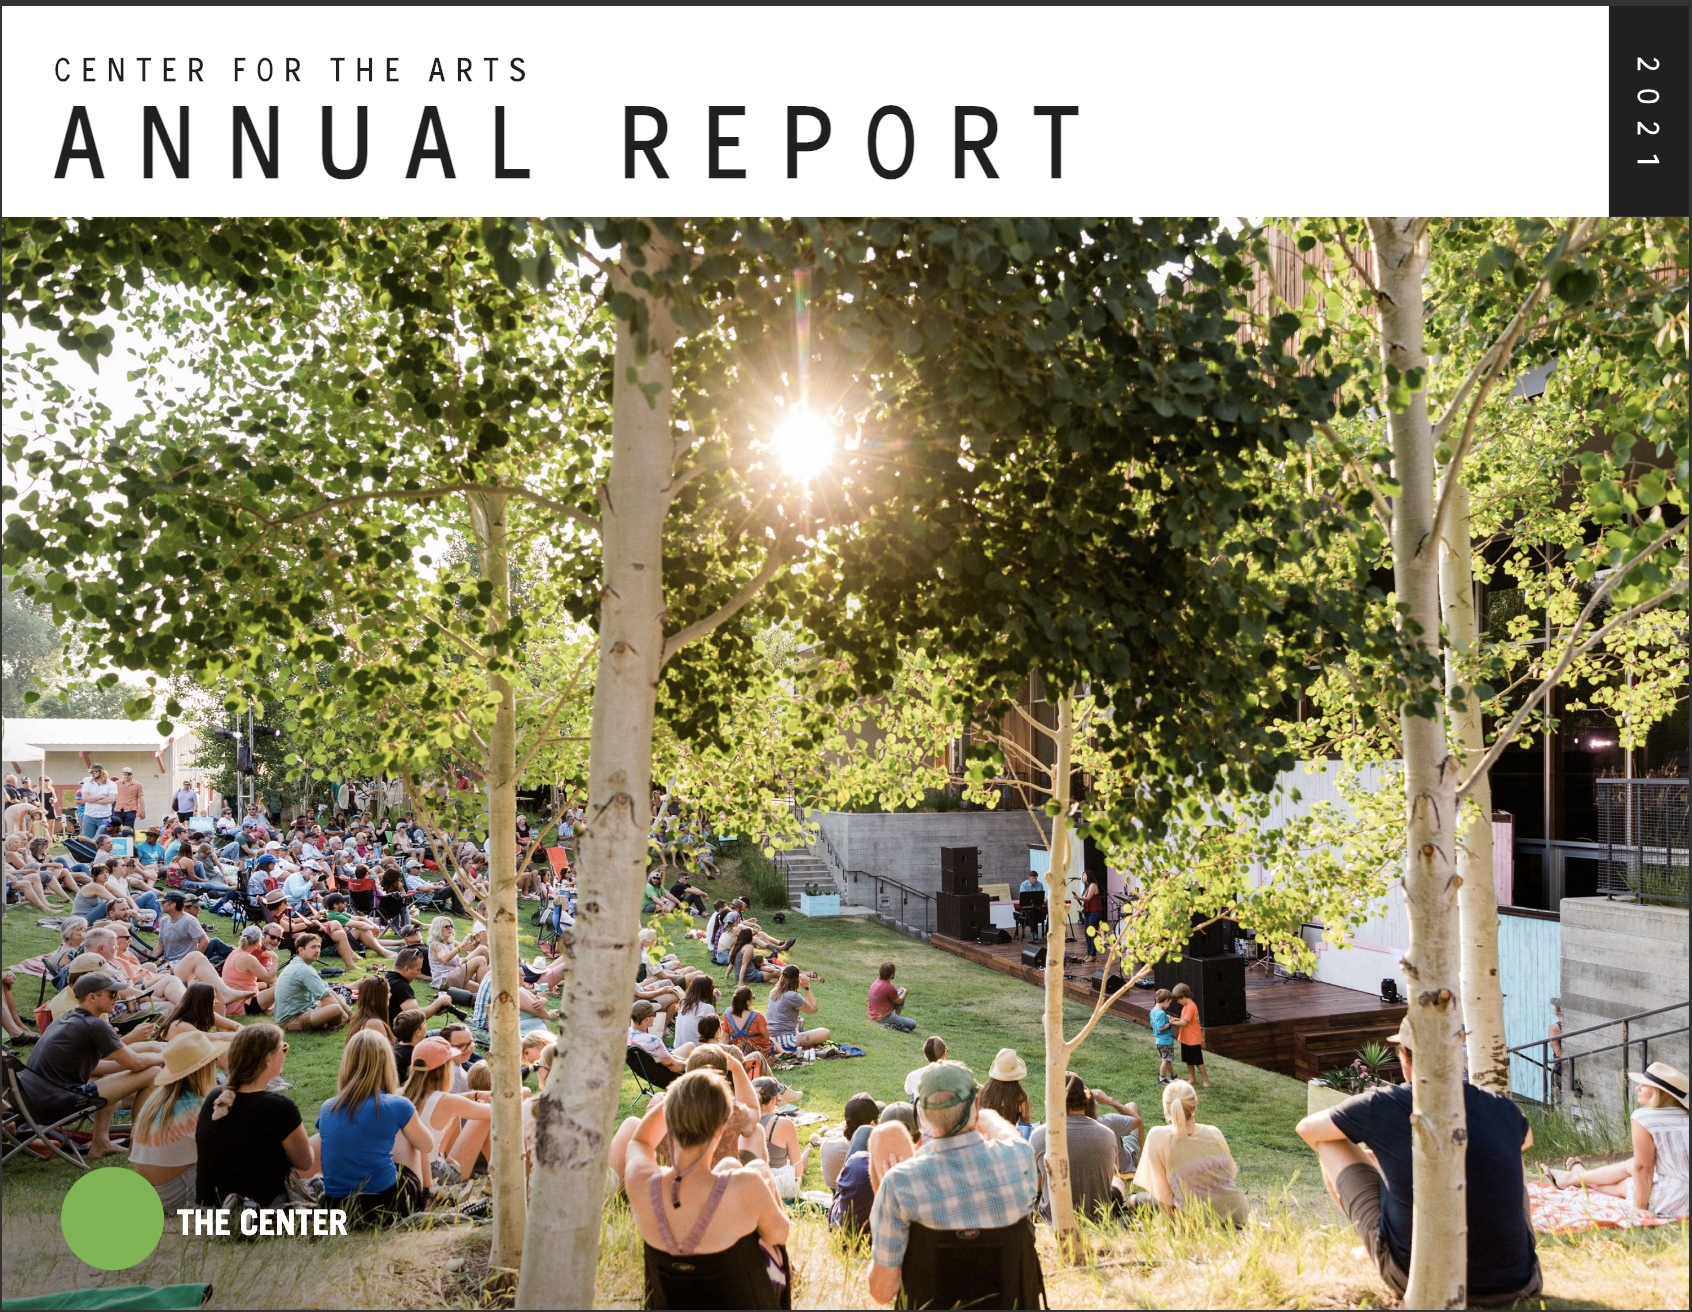 Center for the arts annual report 2021 cover, showing the lawn of the center full of people sitting in the sun enjoying a show